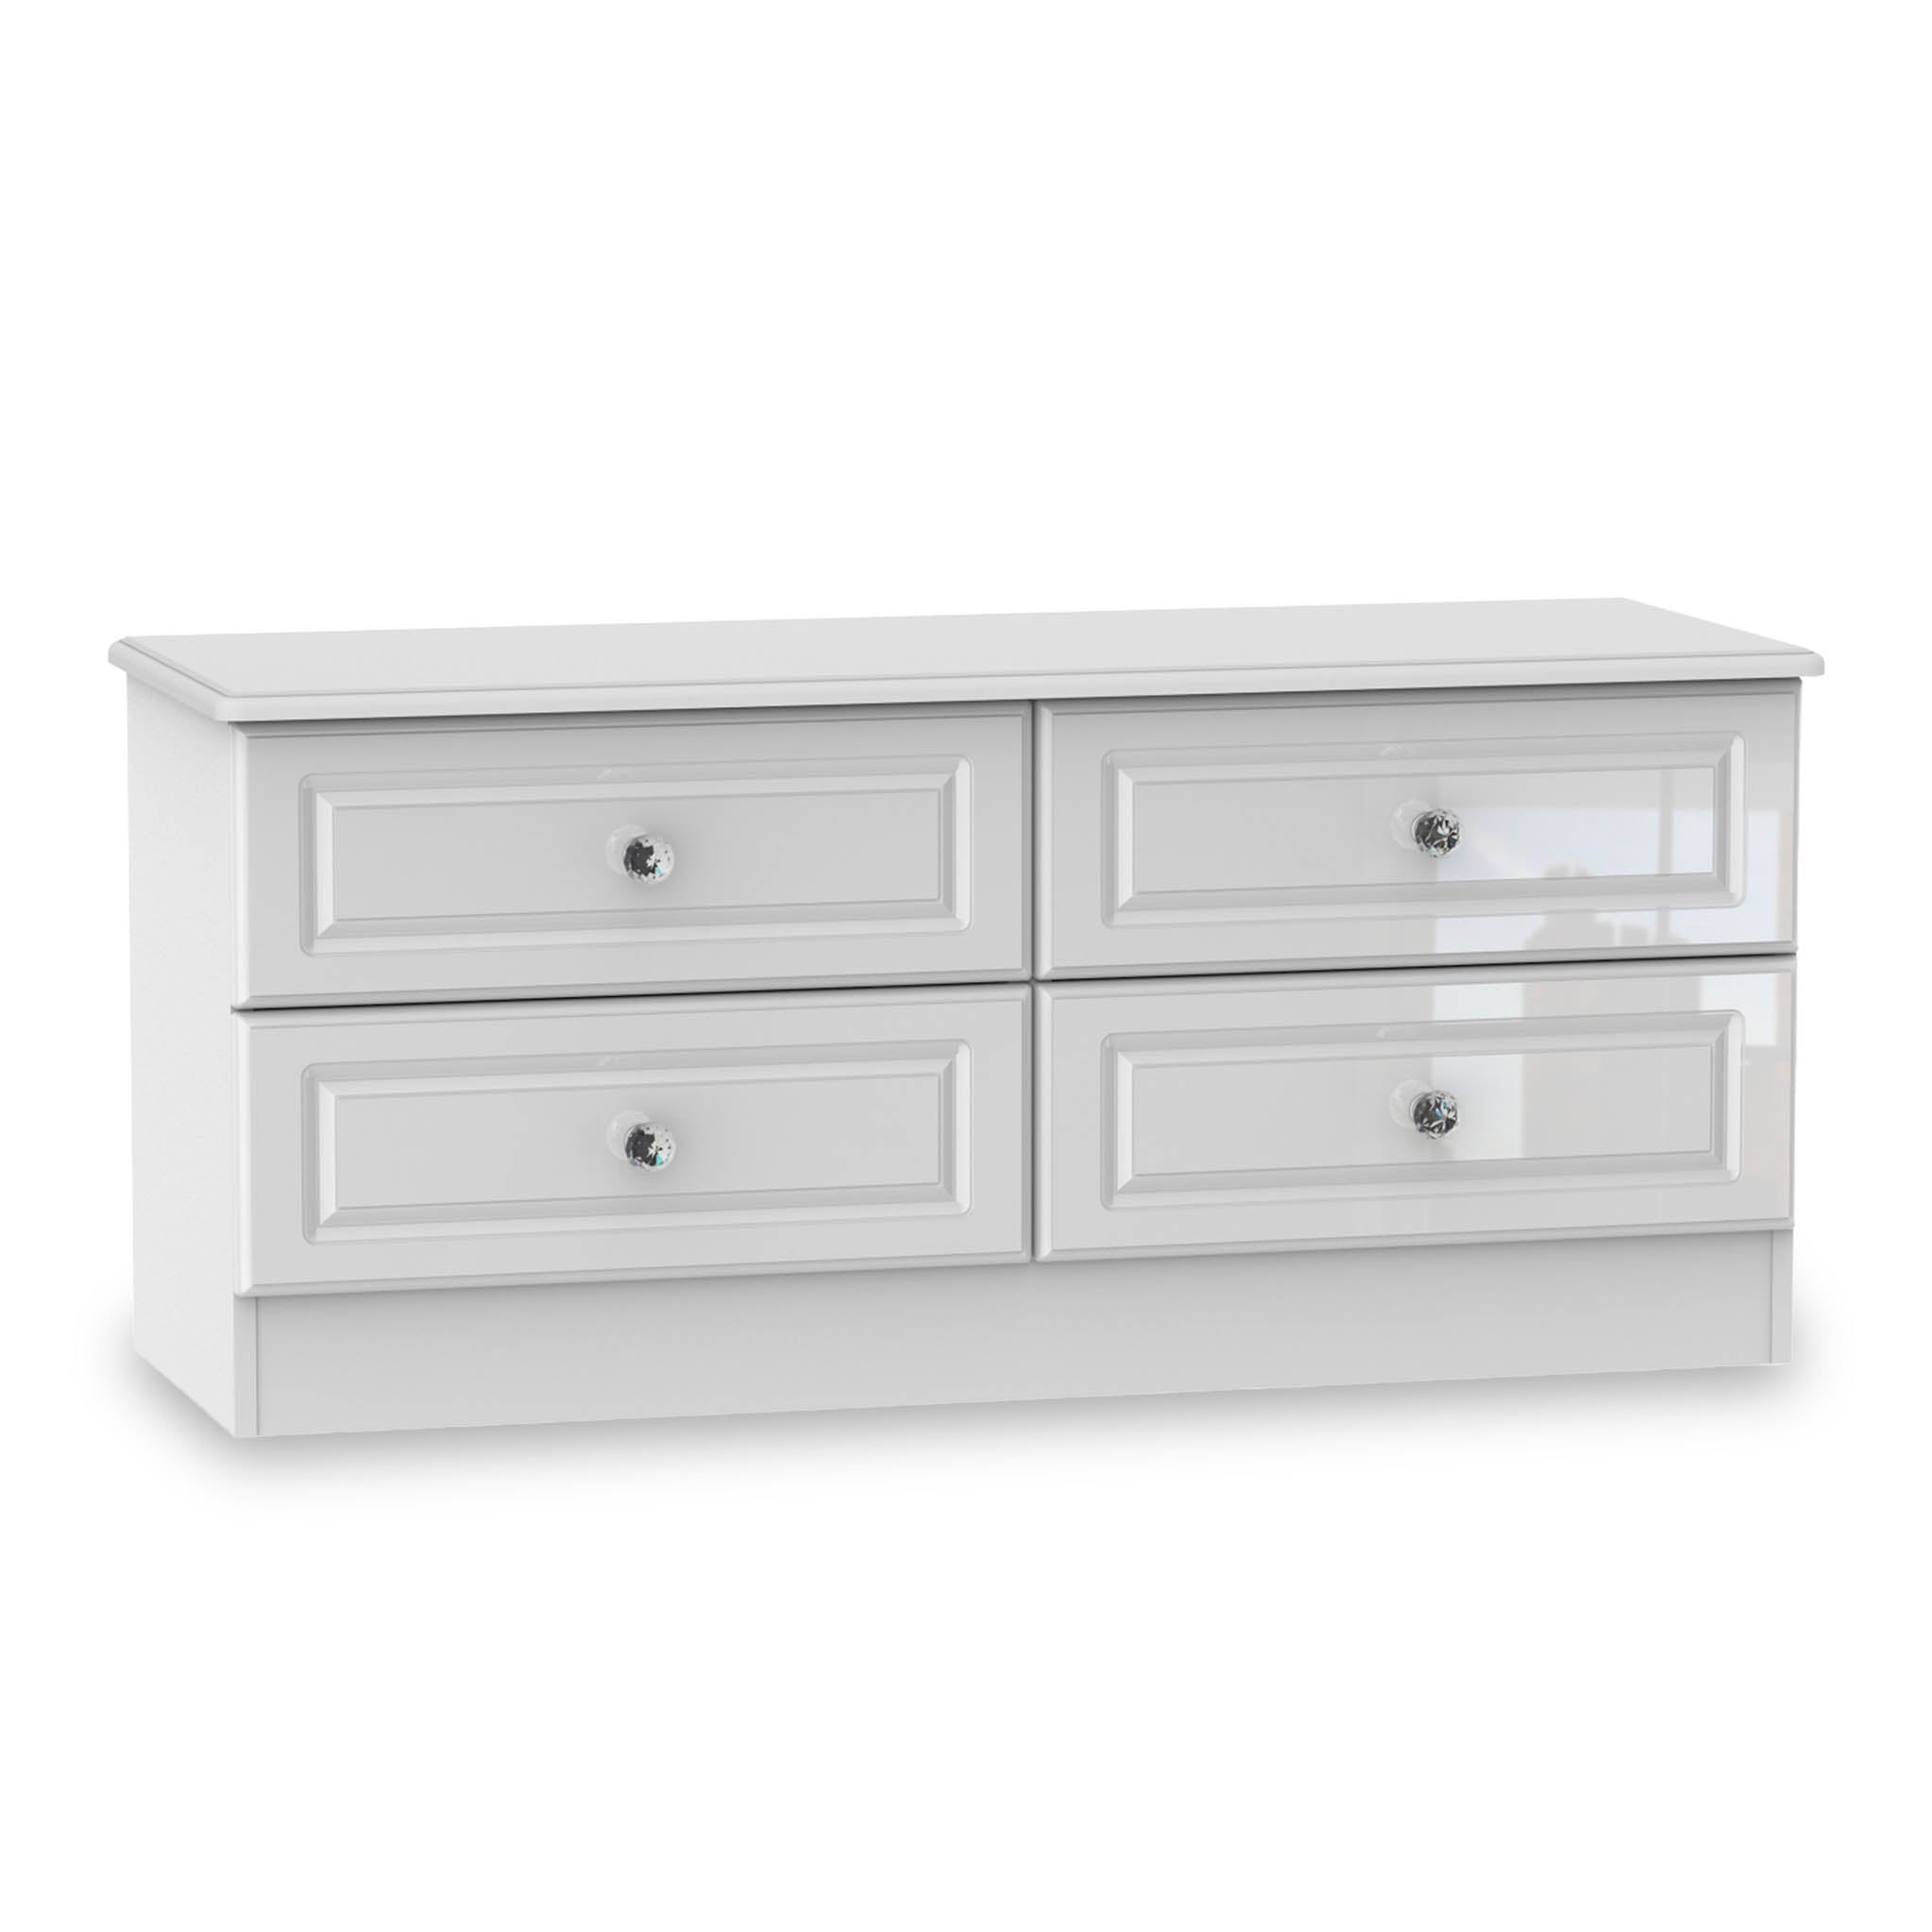 Kinsley White Gloss Contemporary 4 Drawer Low Storage Chest Unit